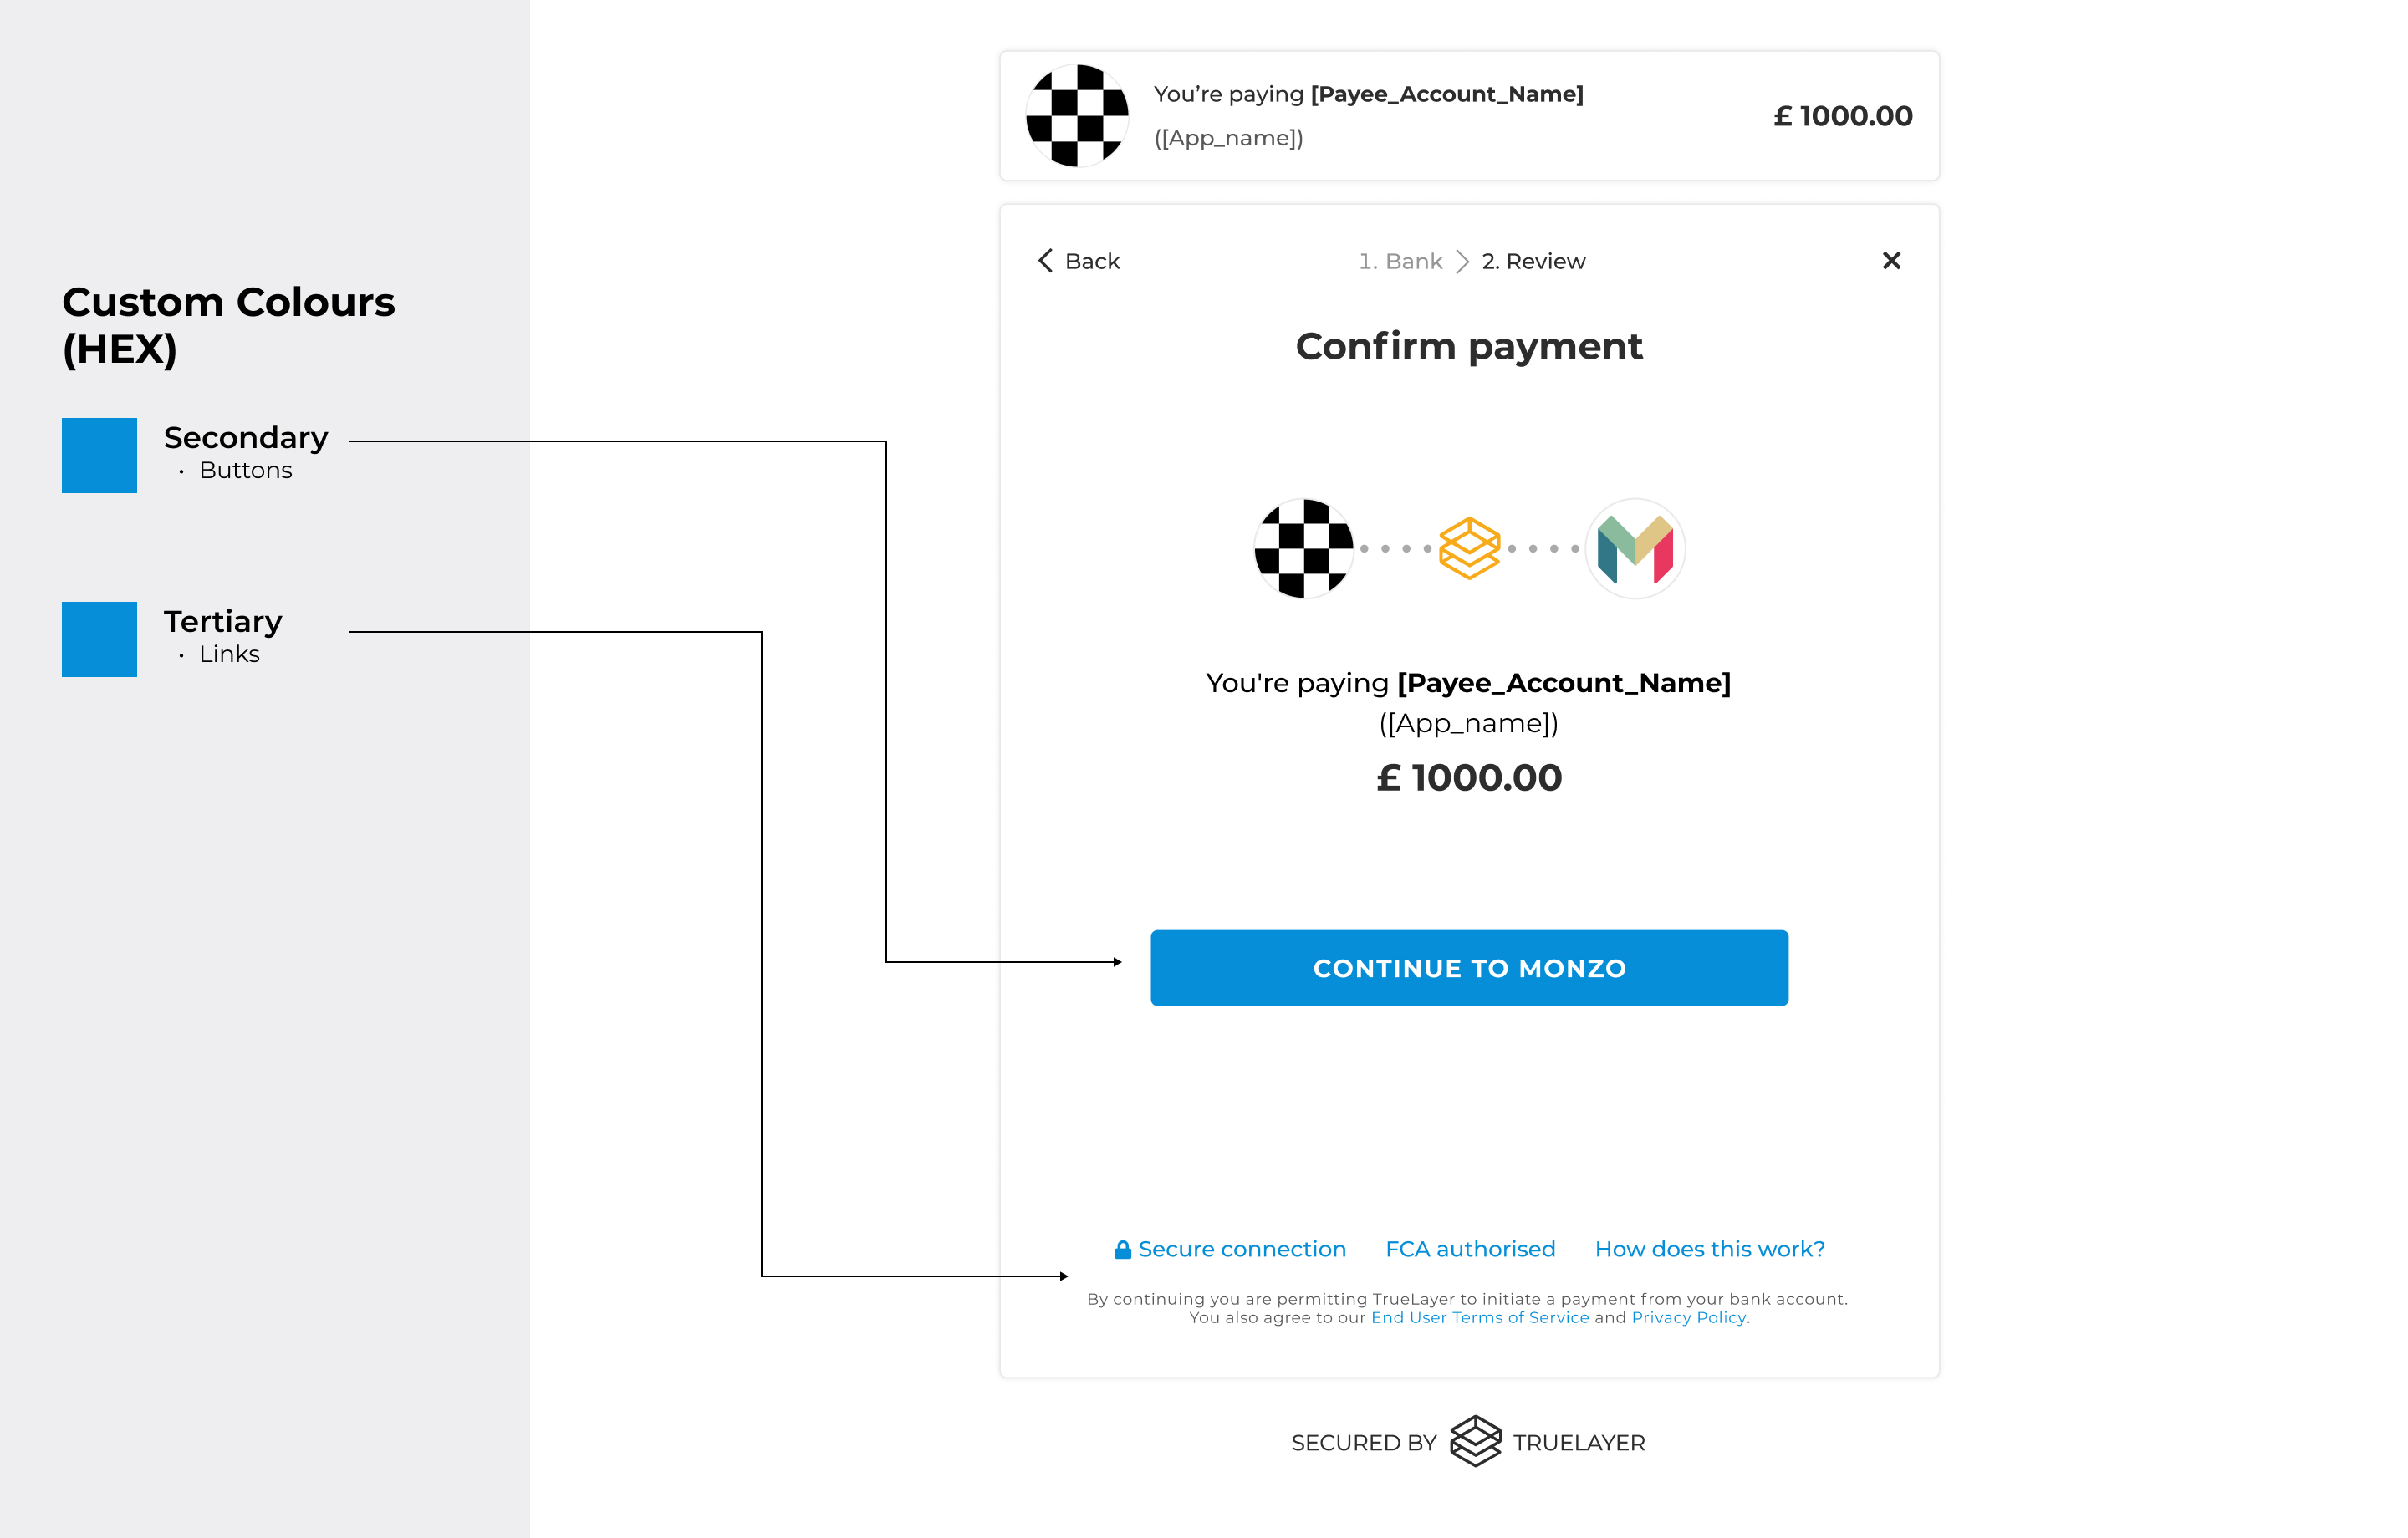 Image showing payment confirmation screen with the customisable features of secondary button and tertiary link colours.